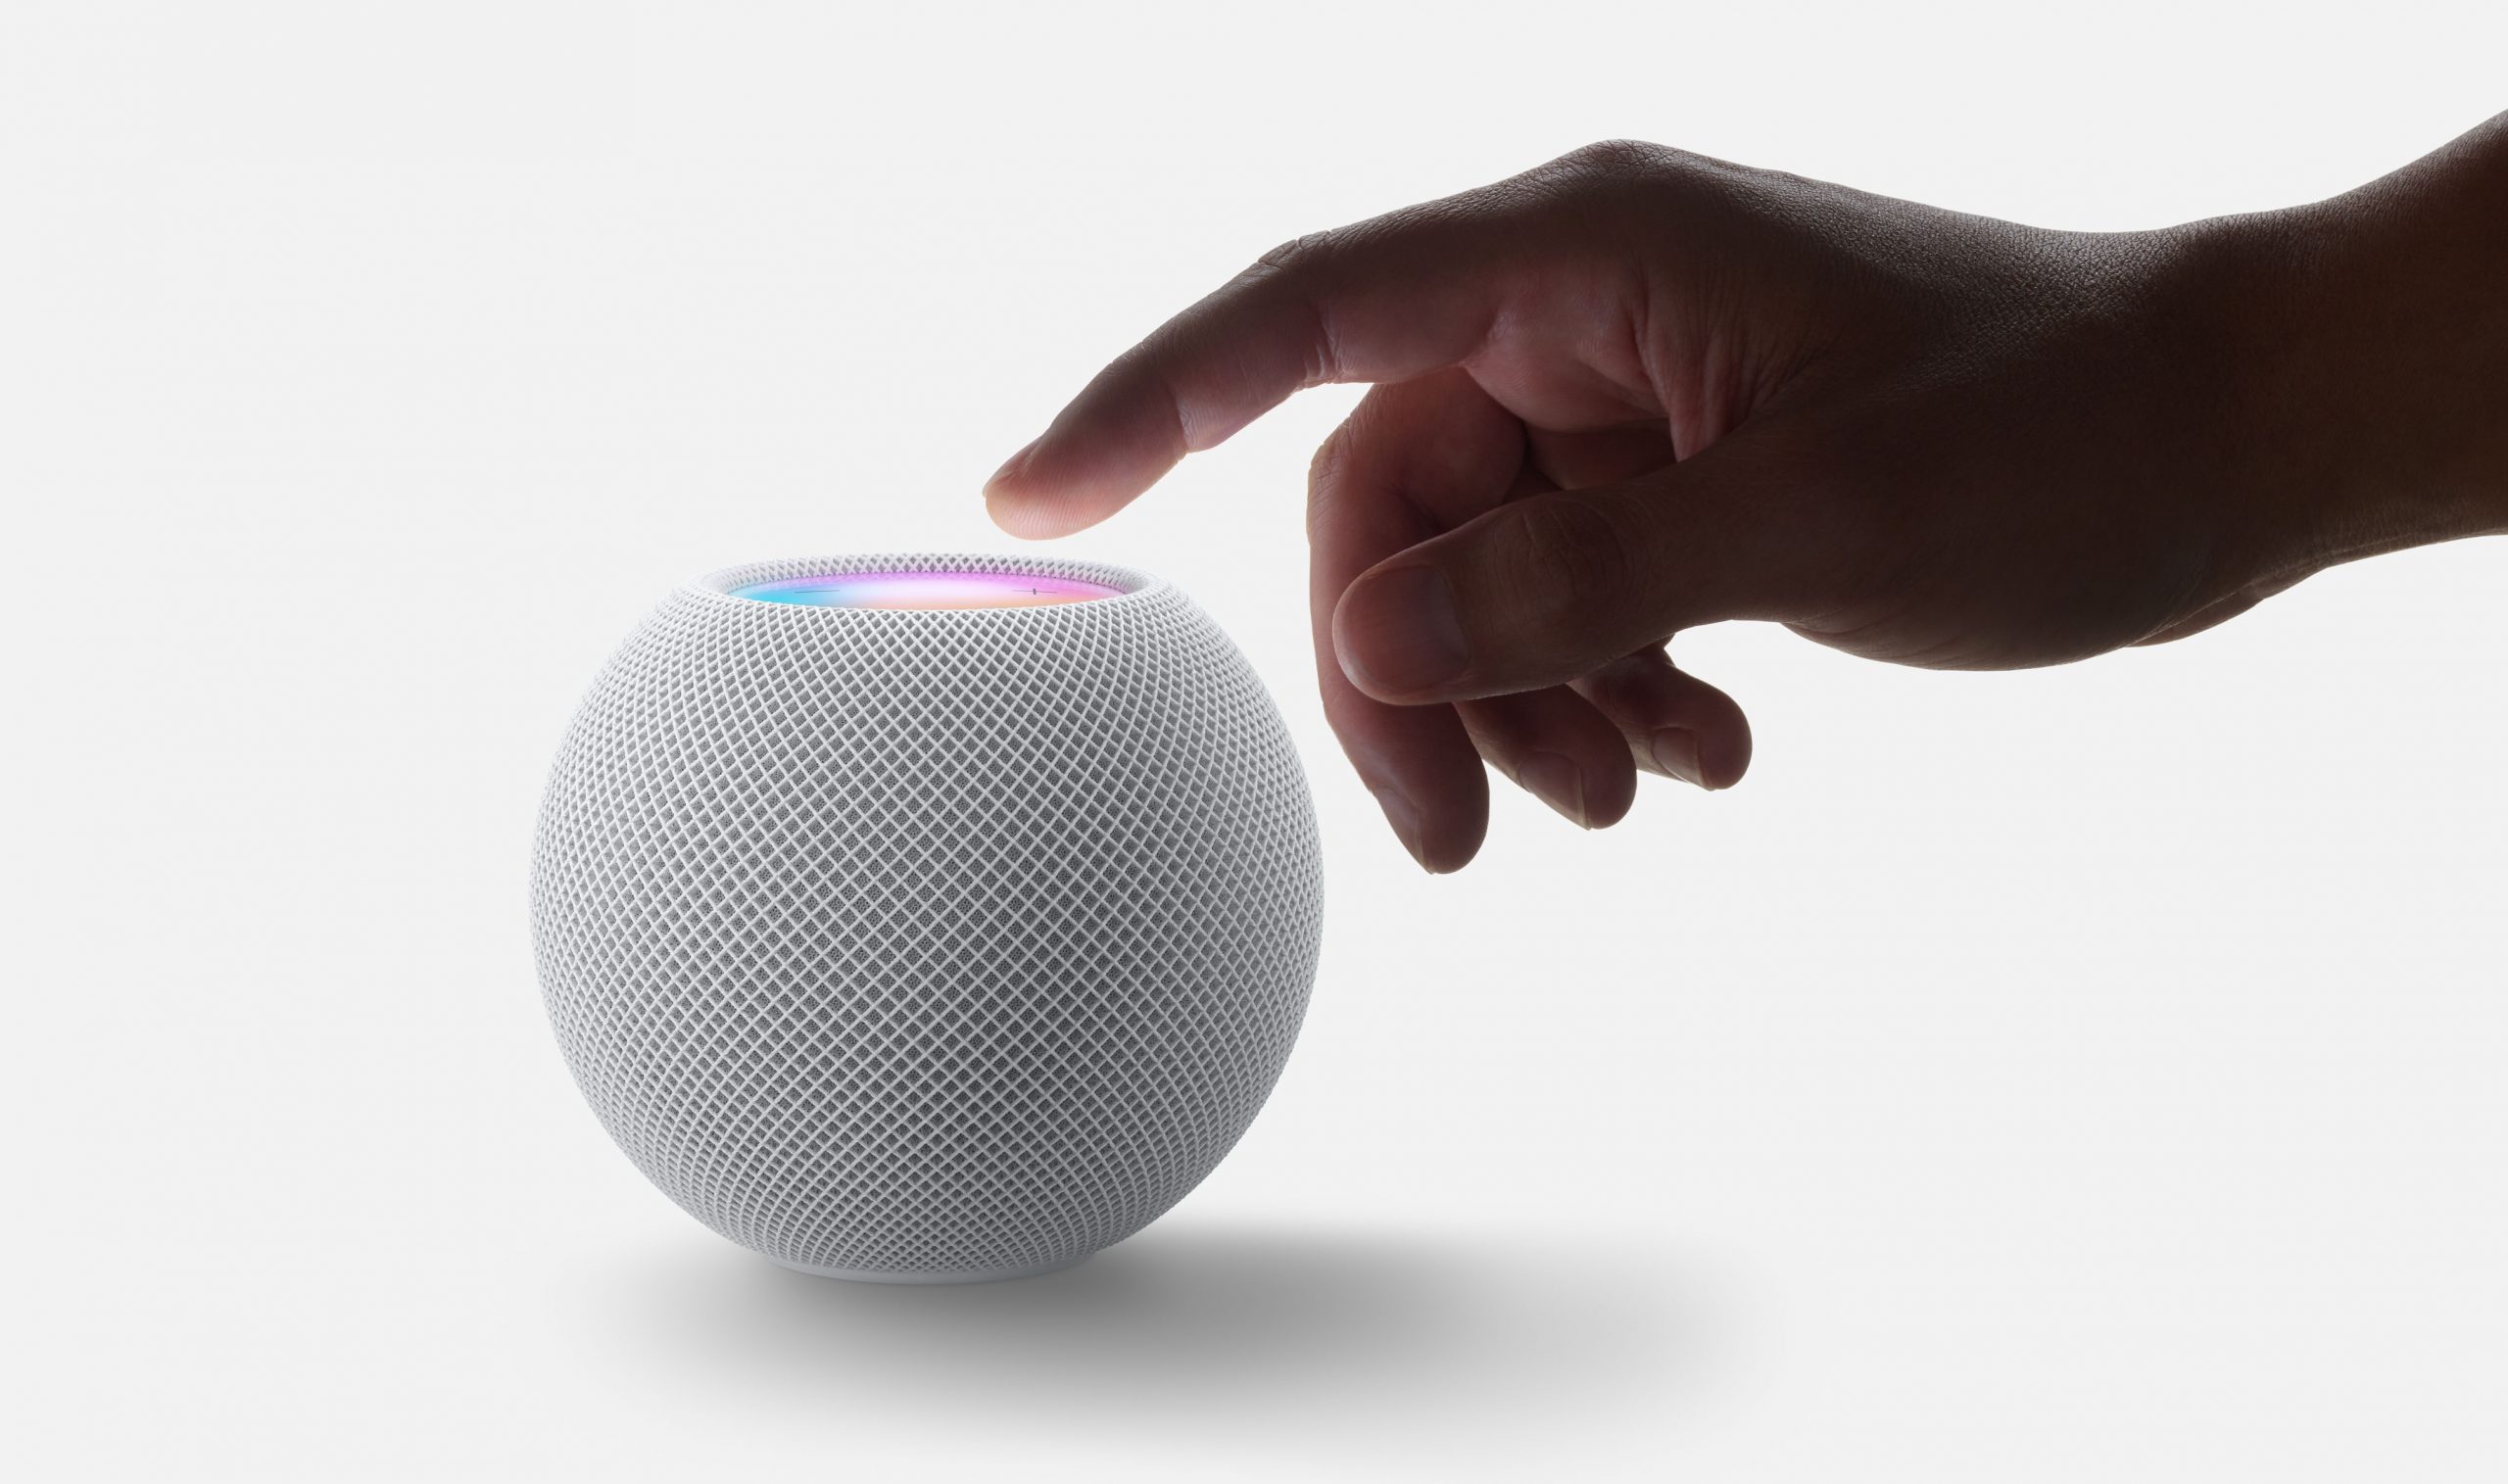 Apple are working on adding touch-sensitive fabric and display controls to HomePods